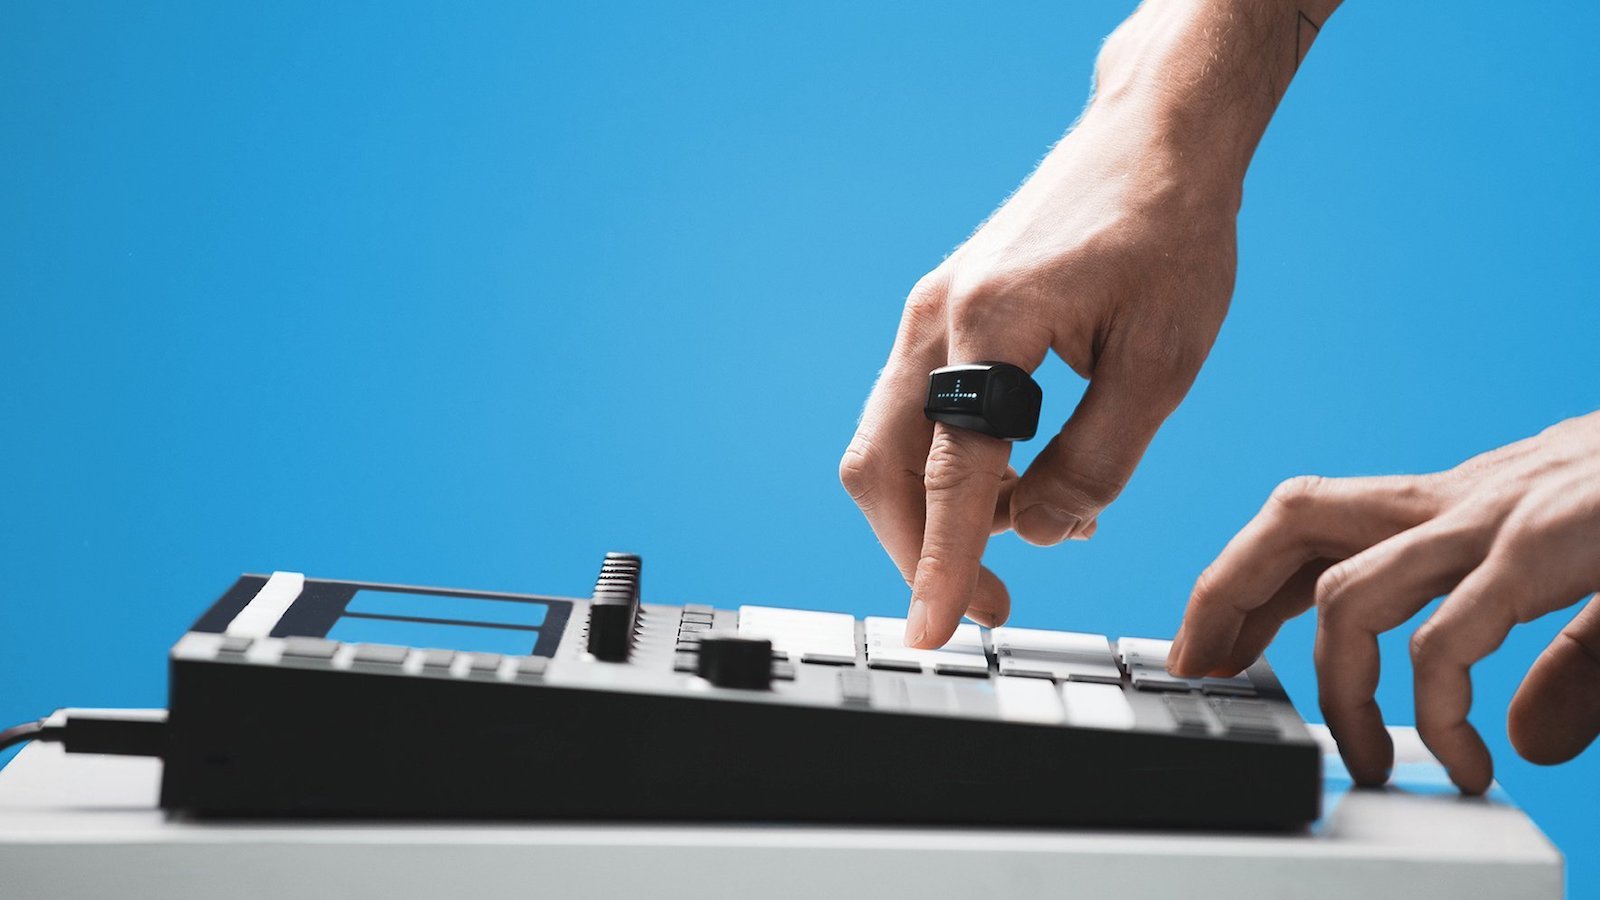 Genki Wave music ring lets you control musical arrangements with gesture control